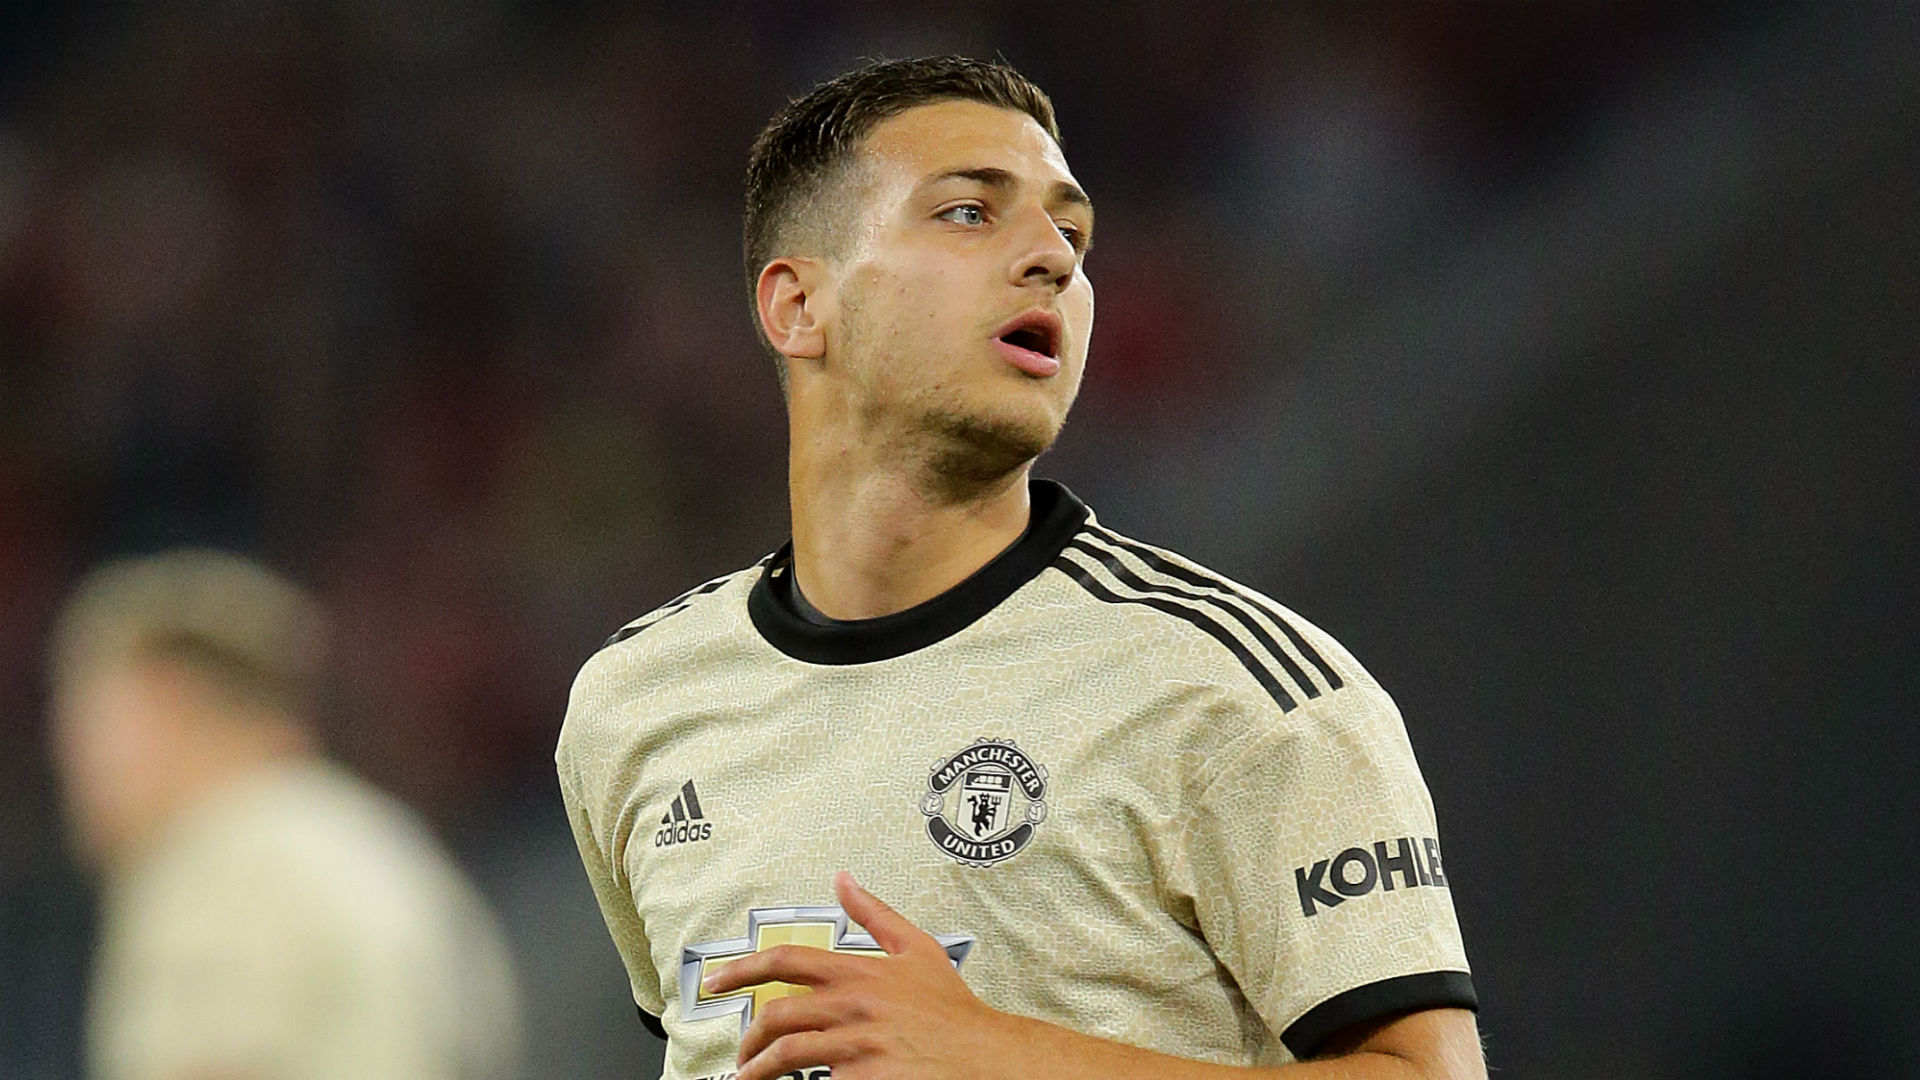 Manchester United's Diogo Dalot spent 2021/22 on loan at Milan, establishing himself as a key contributor to the team's success enroute UCL qualification.